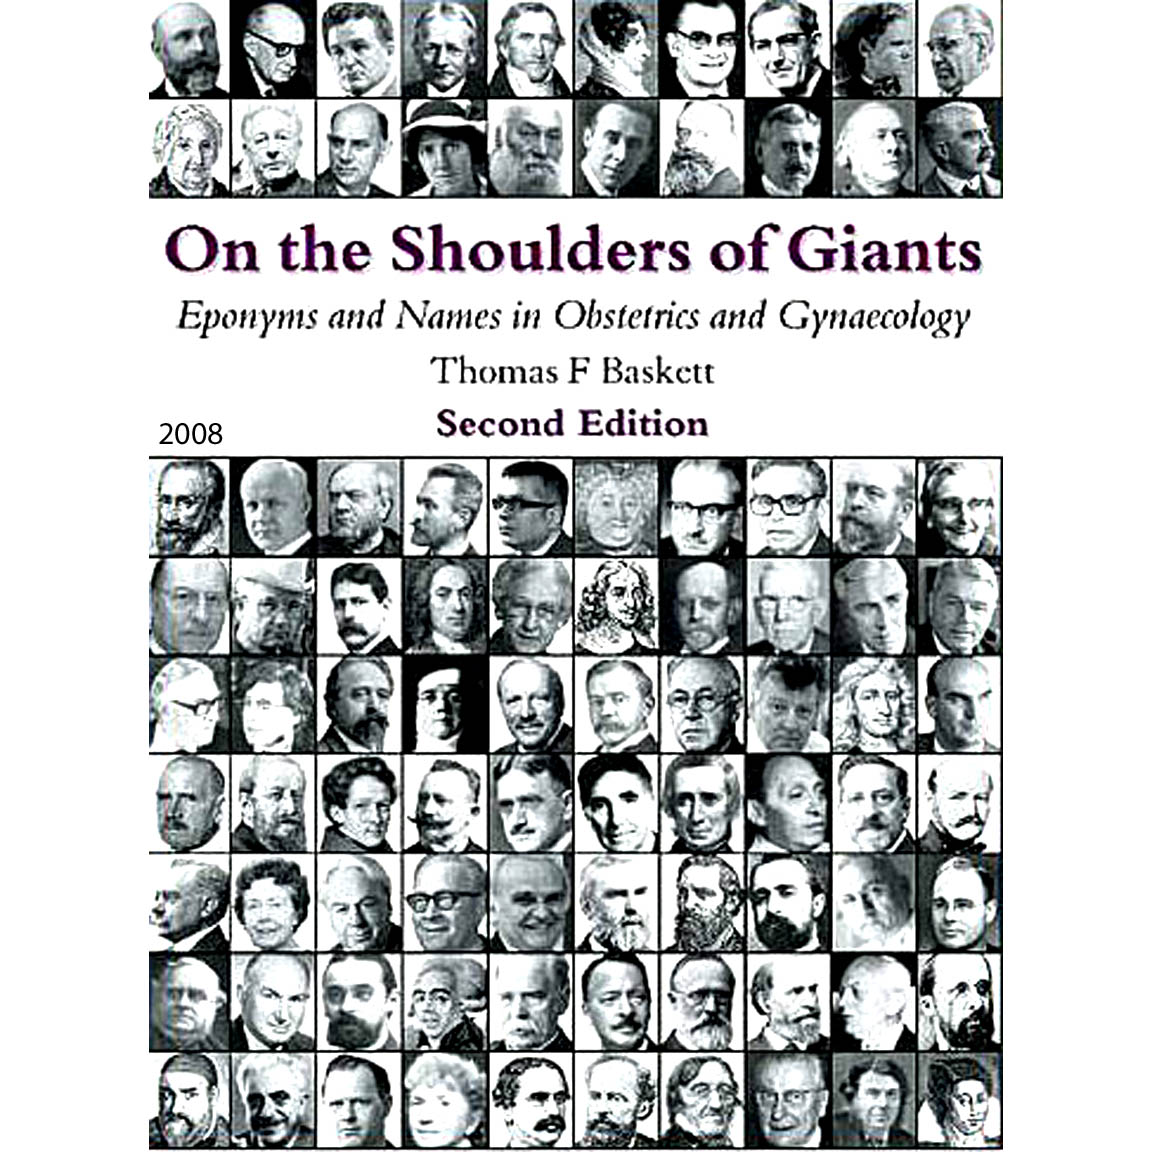 2008-BASKETT-Cover-On the shoulders of giants